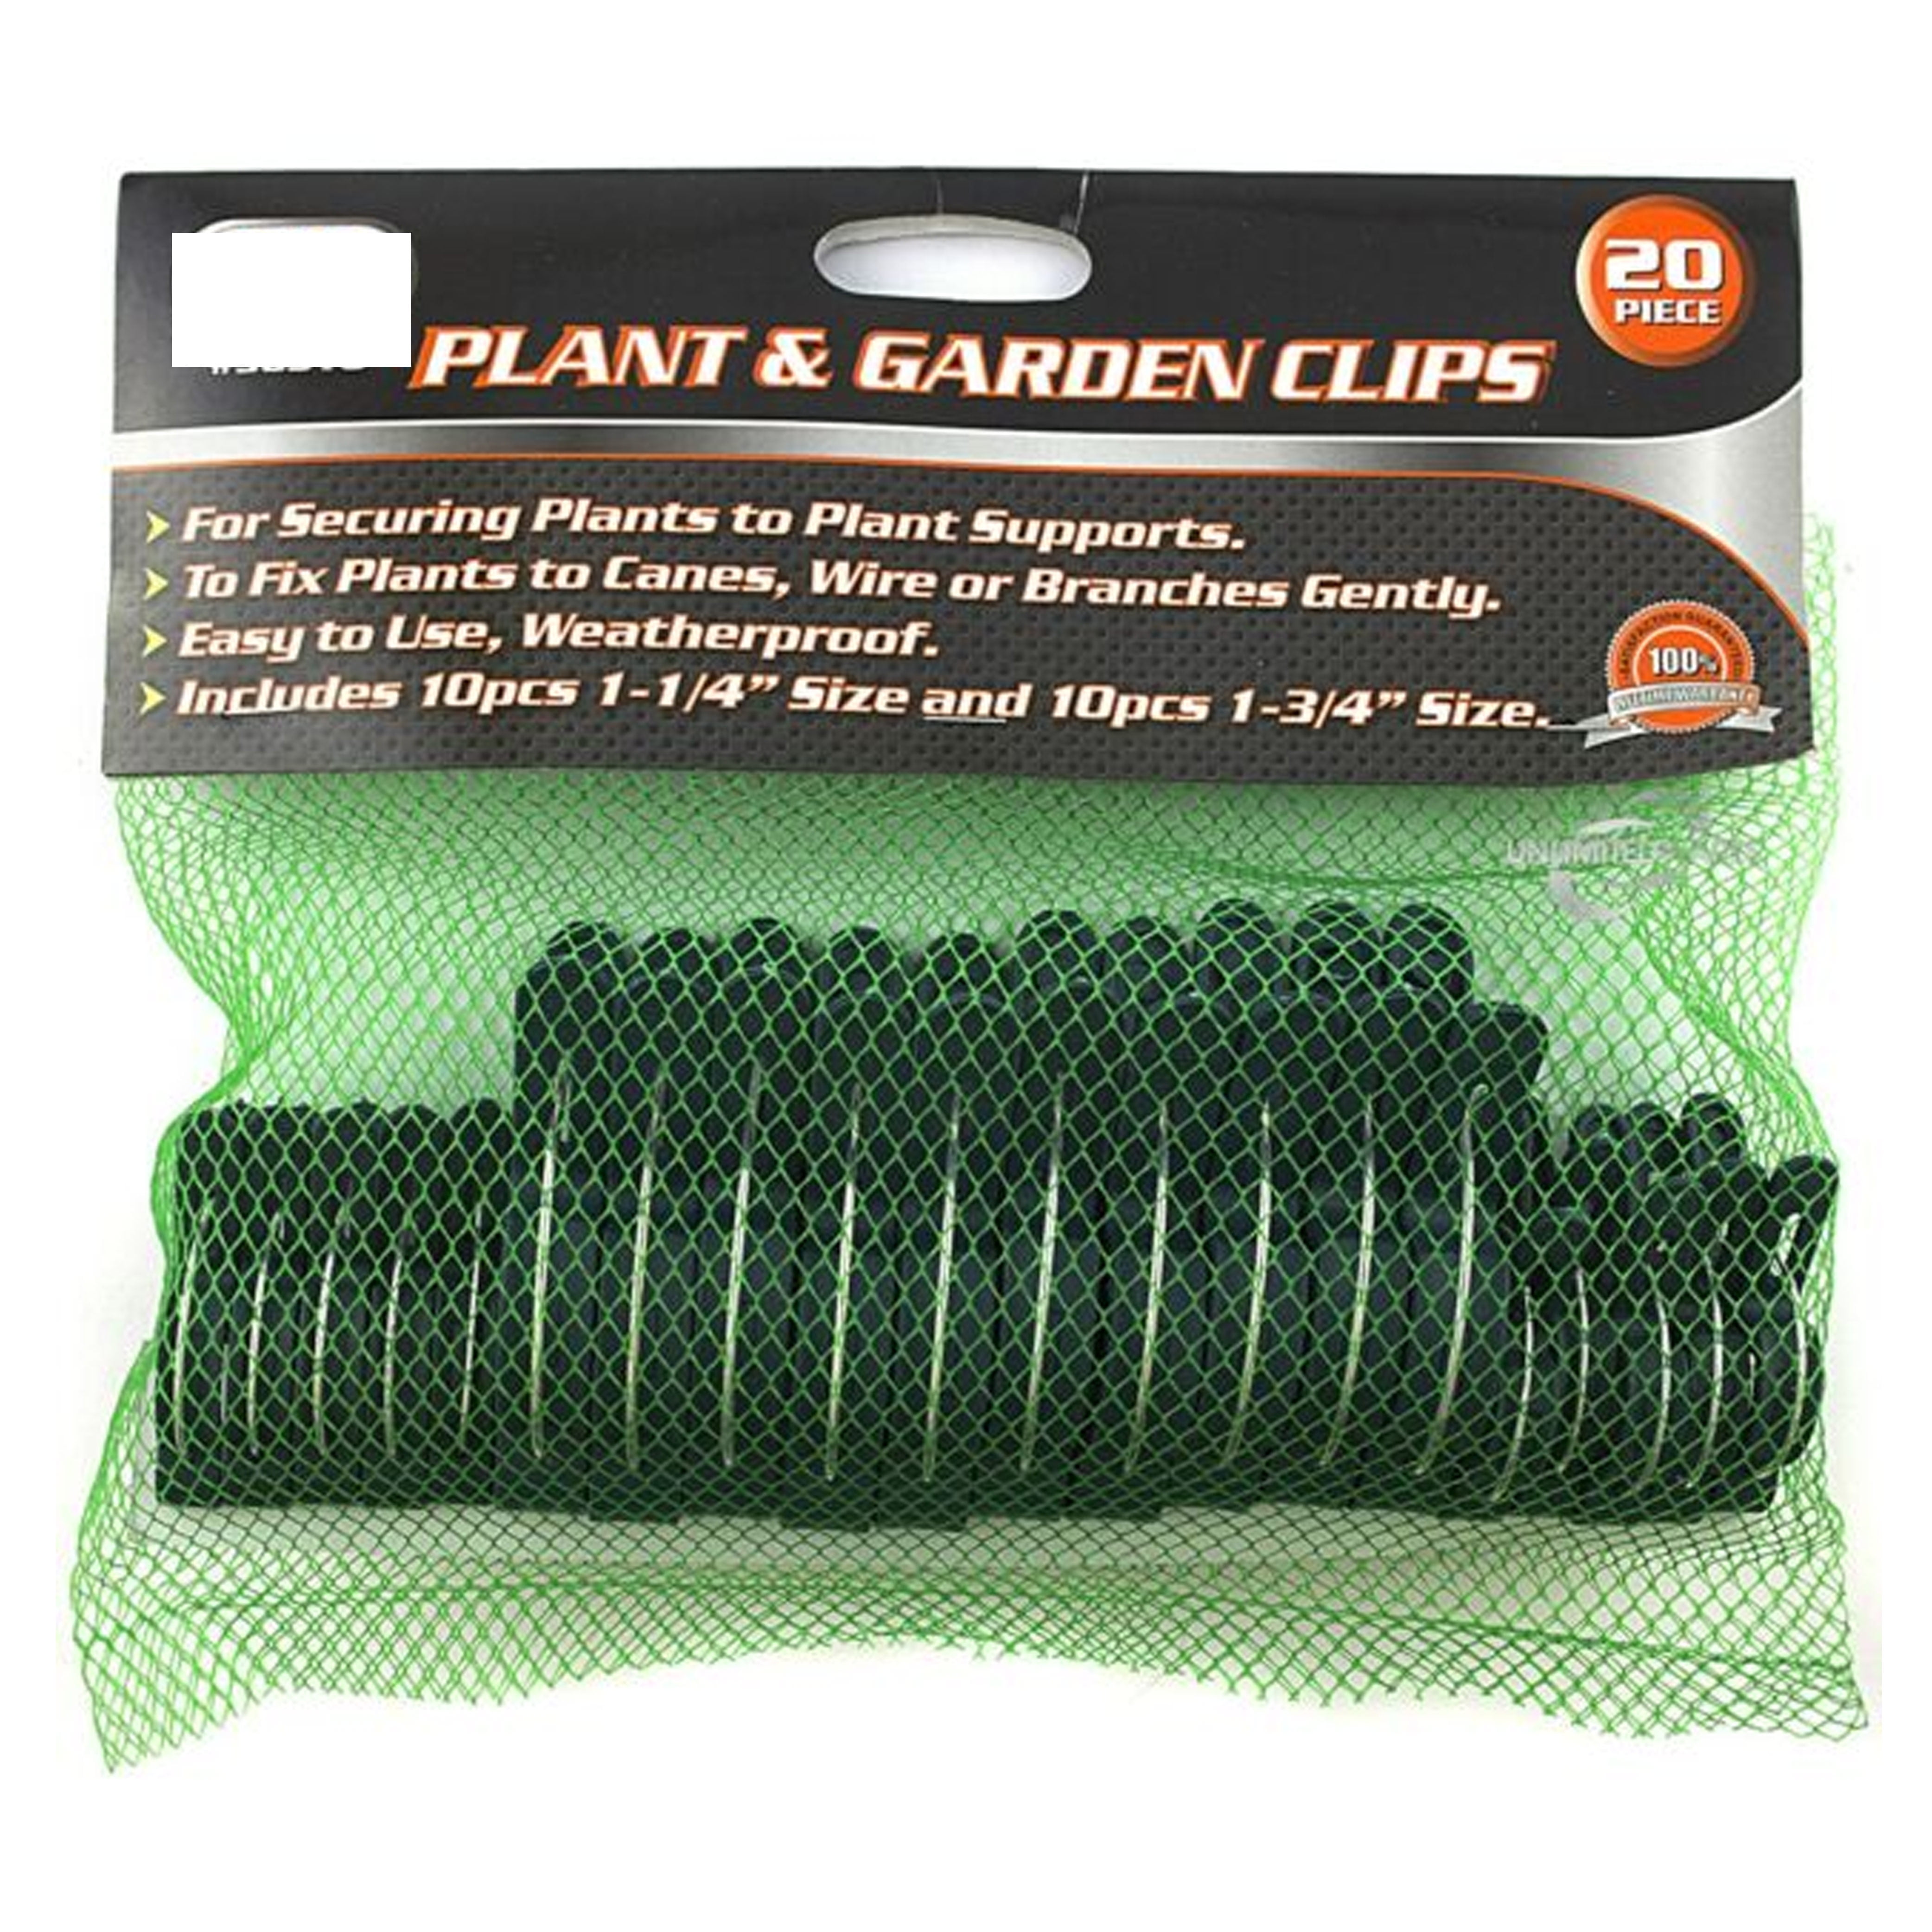 Gardening Spring Clips for Plants Stems Support Sago Brothers 20 PCS Plant and Flower Clips 